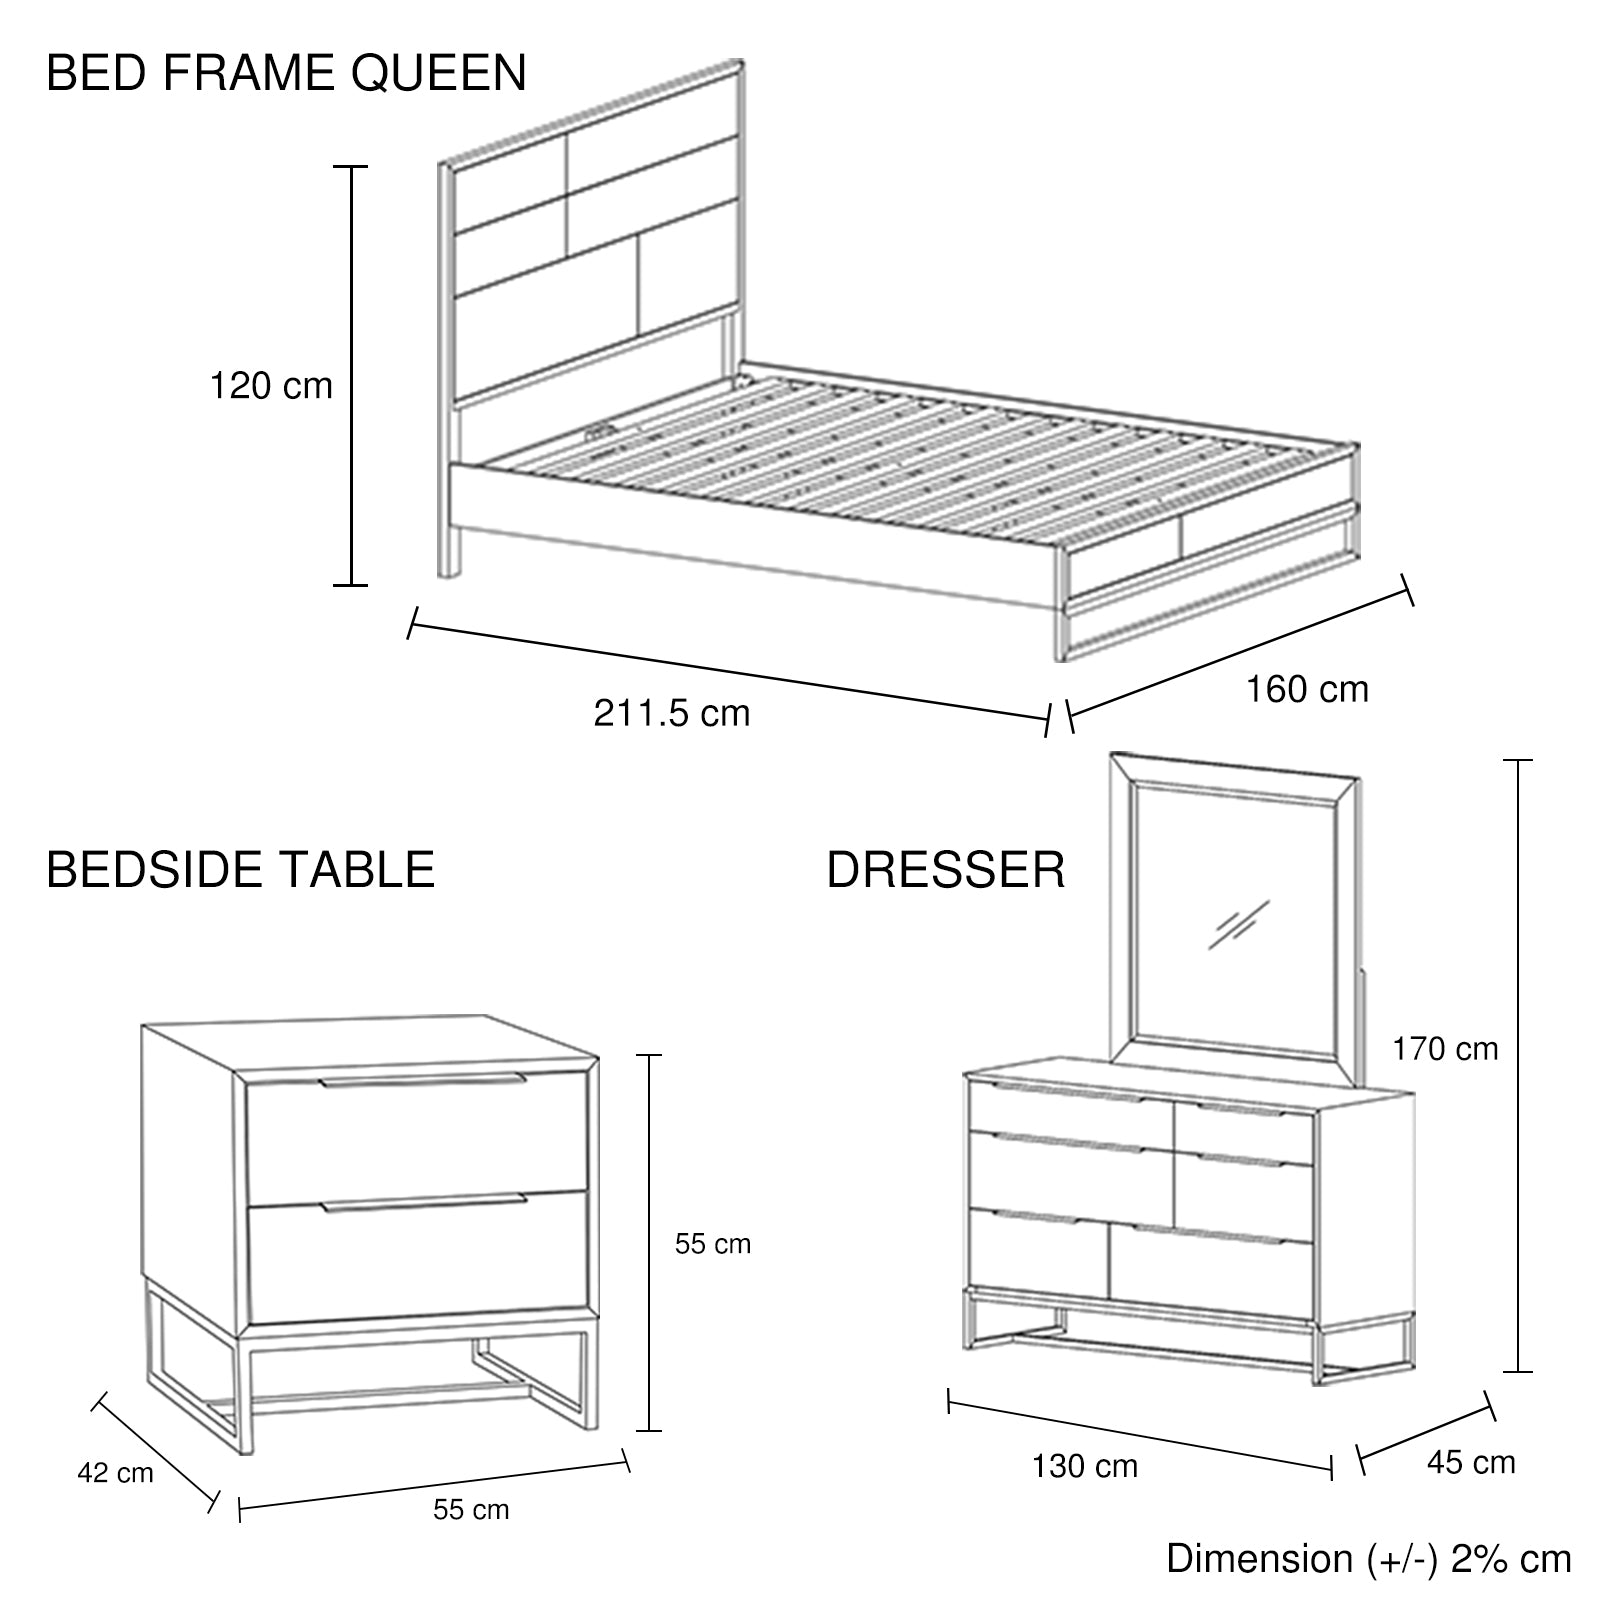 4 Pieces Bedroom Suite made in Solid Wood Acacia Veneered Queen Size Oak Colour Bed, Bedside Table & Dresser - SILBERSHELL